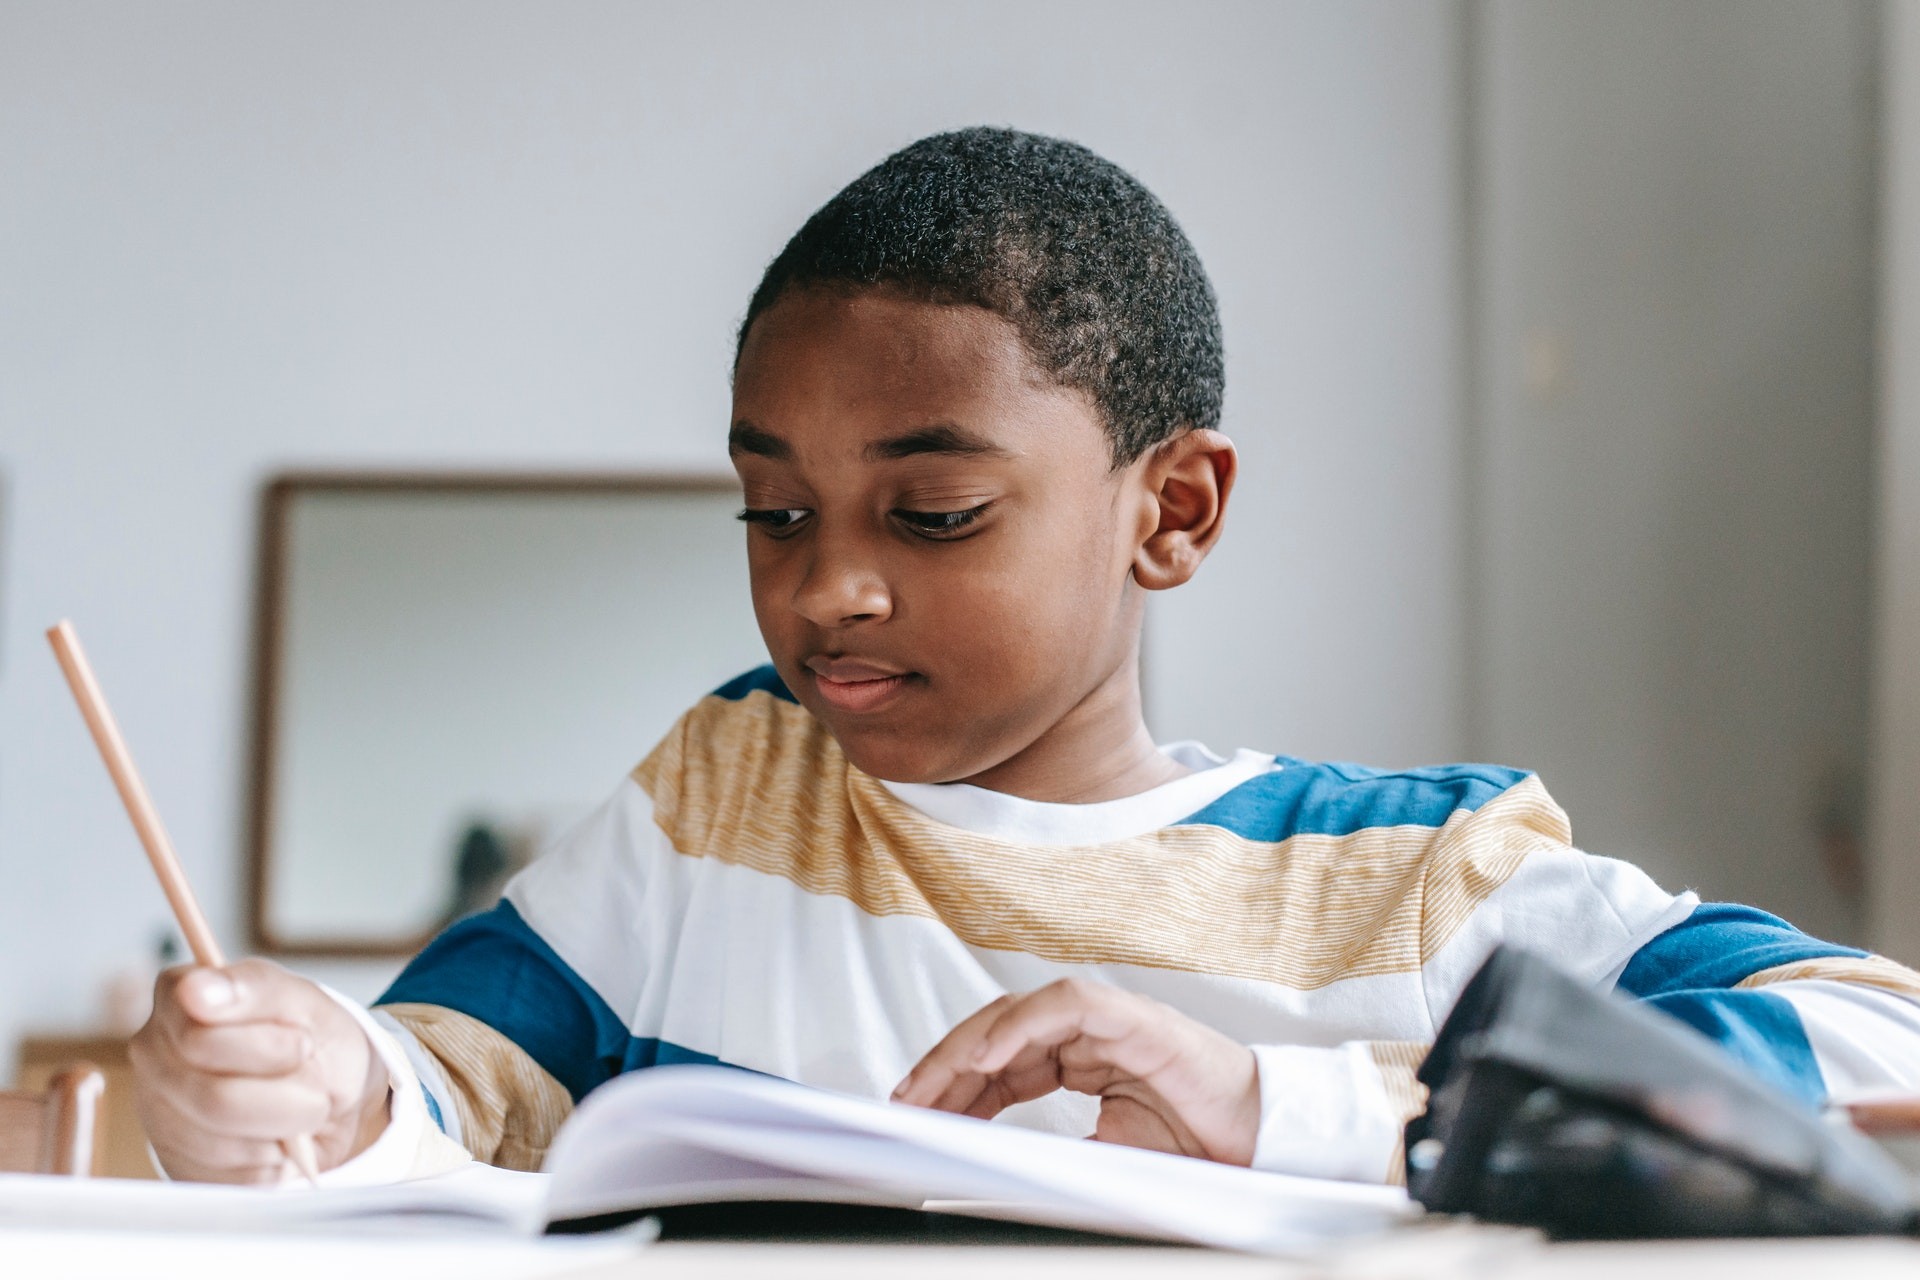 Young boy sits at a desk with a notebook and pencil writing a story.